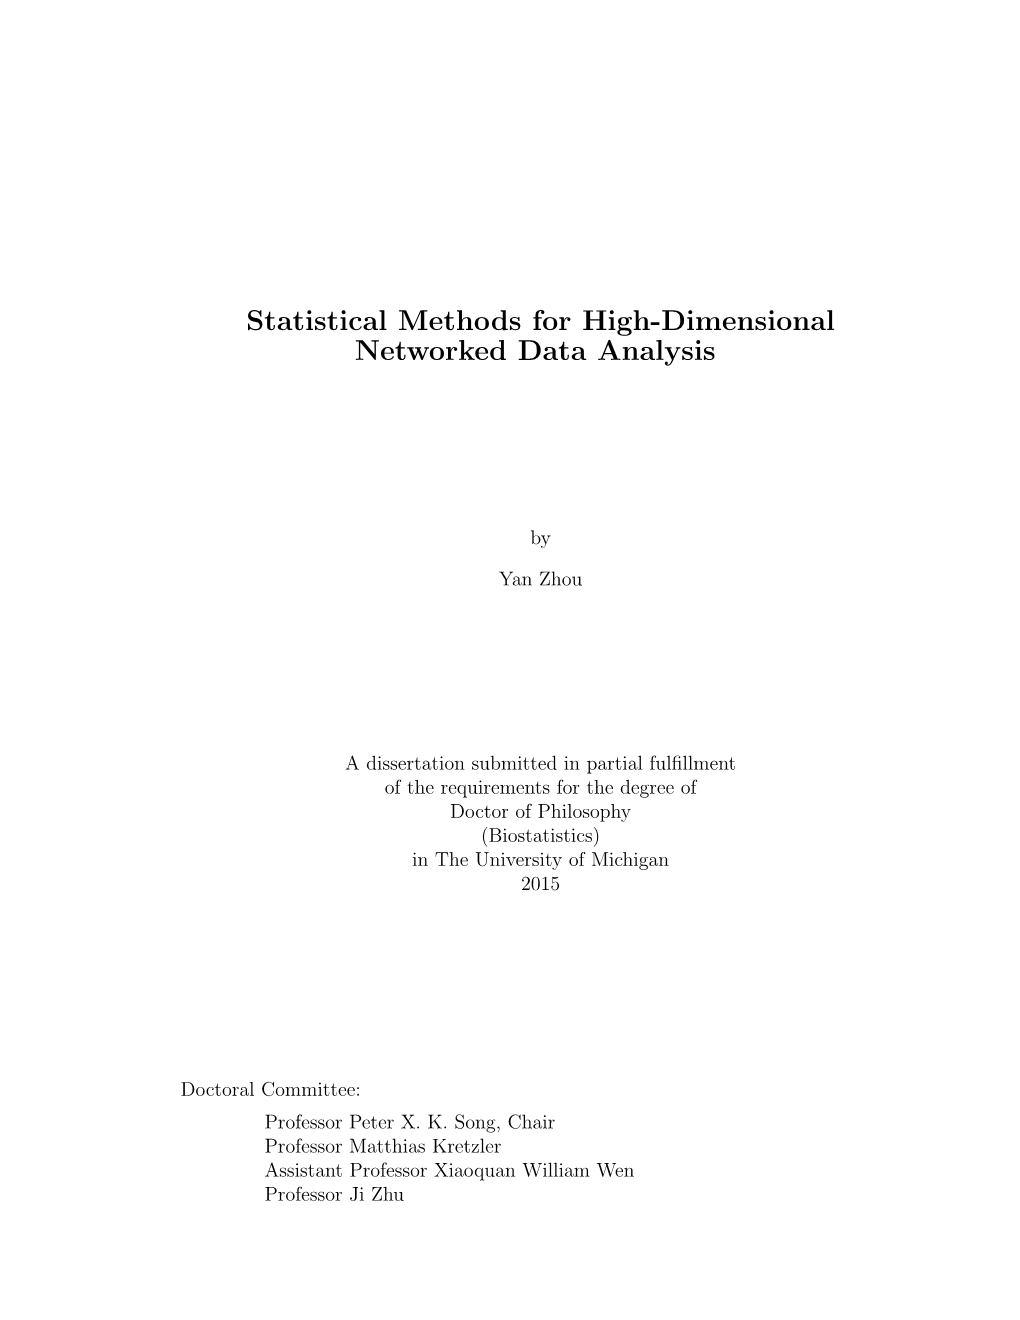 Statistical Methods for High-Dimensional Networked Data Analysis